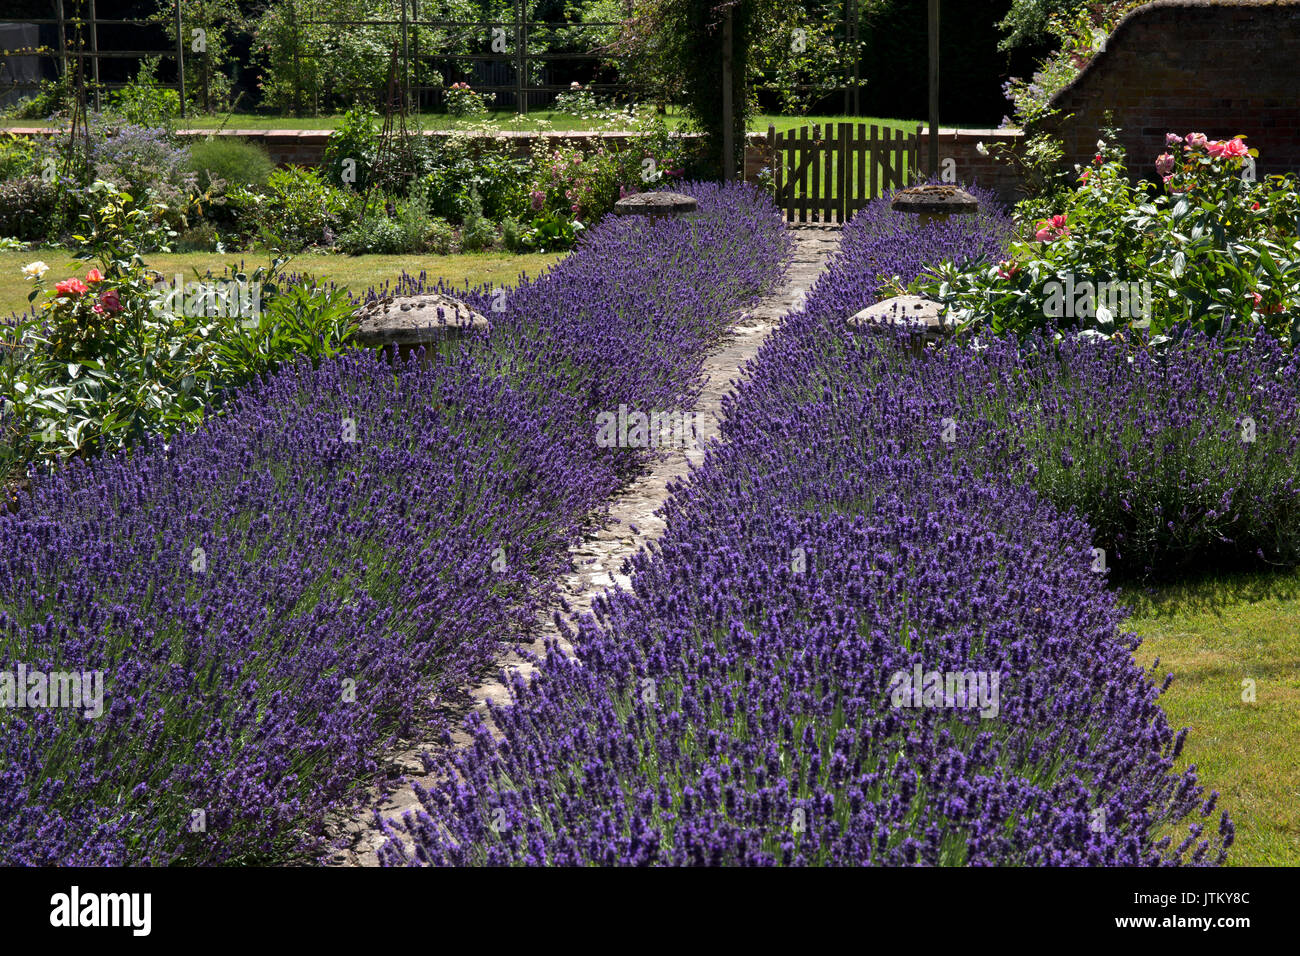 garden path flanked with rows of lavender in english country garden,england Stock Photo